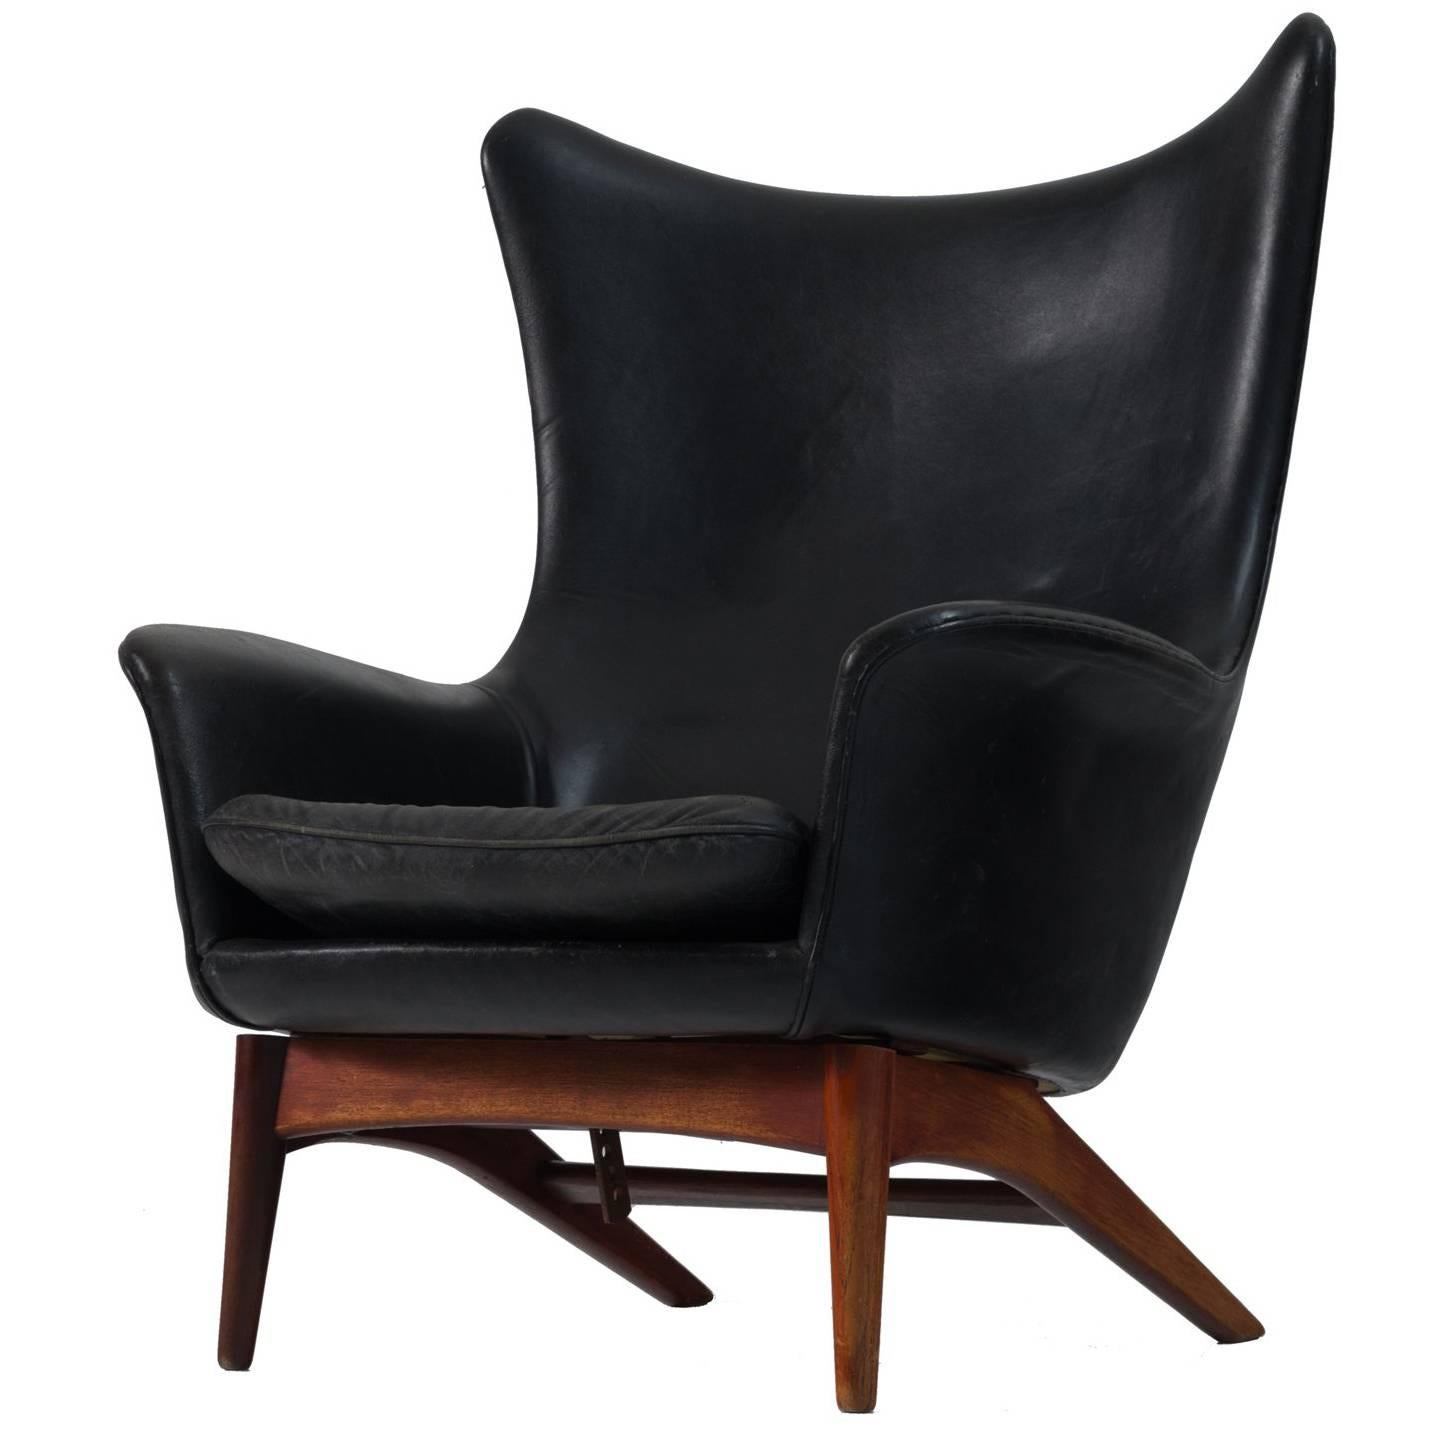 H.W. Klein Reclining Lounge Chair in Black Leather Upholstery